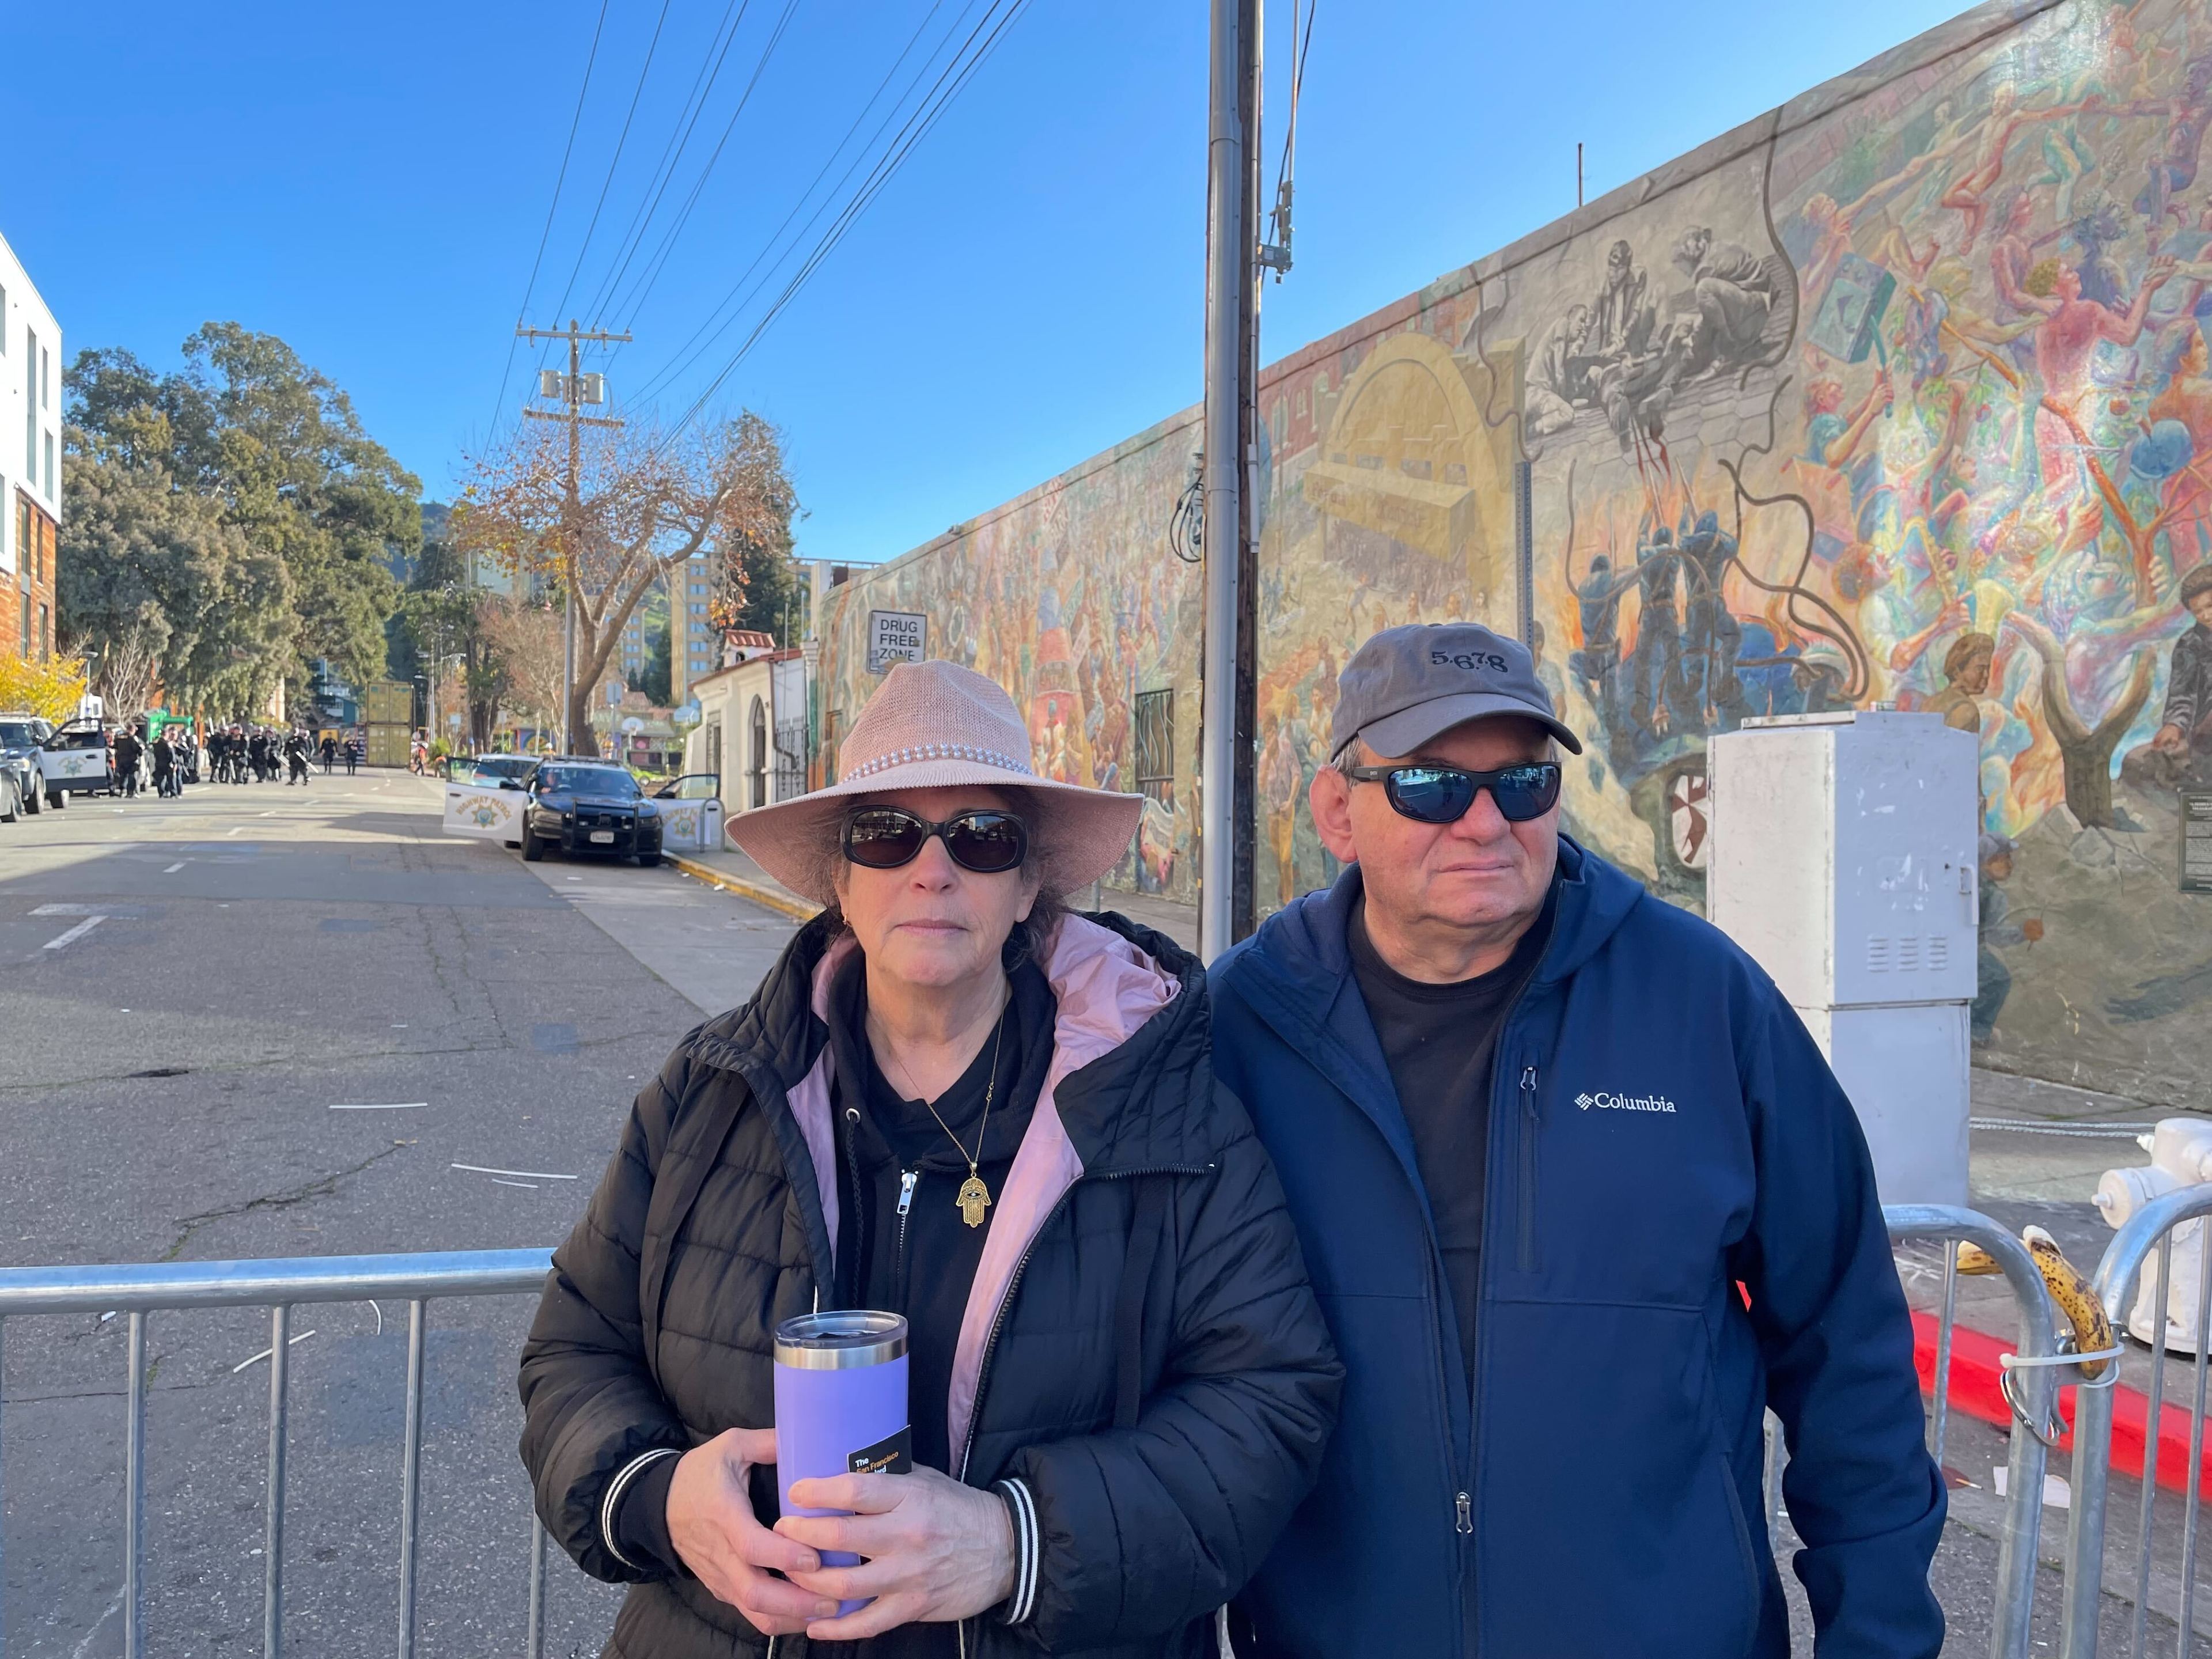 Two people wearing sunglasses, hats and warm dark-colored jackets stand beside a metal police barricade not far from a mural in the shady side of a street under sunny blue sky.